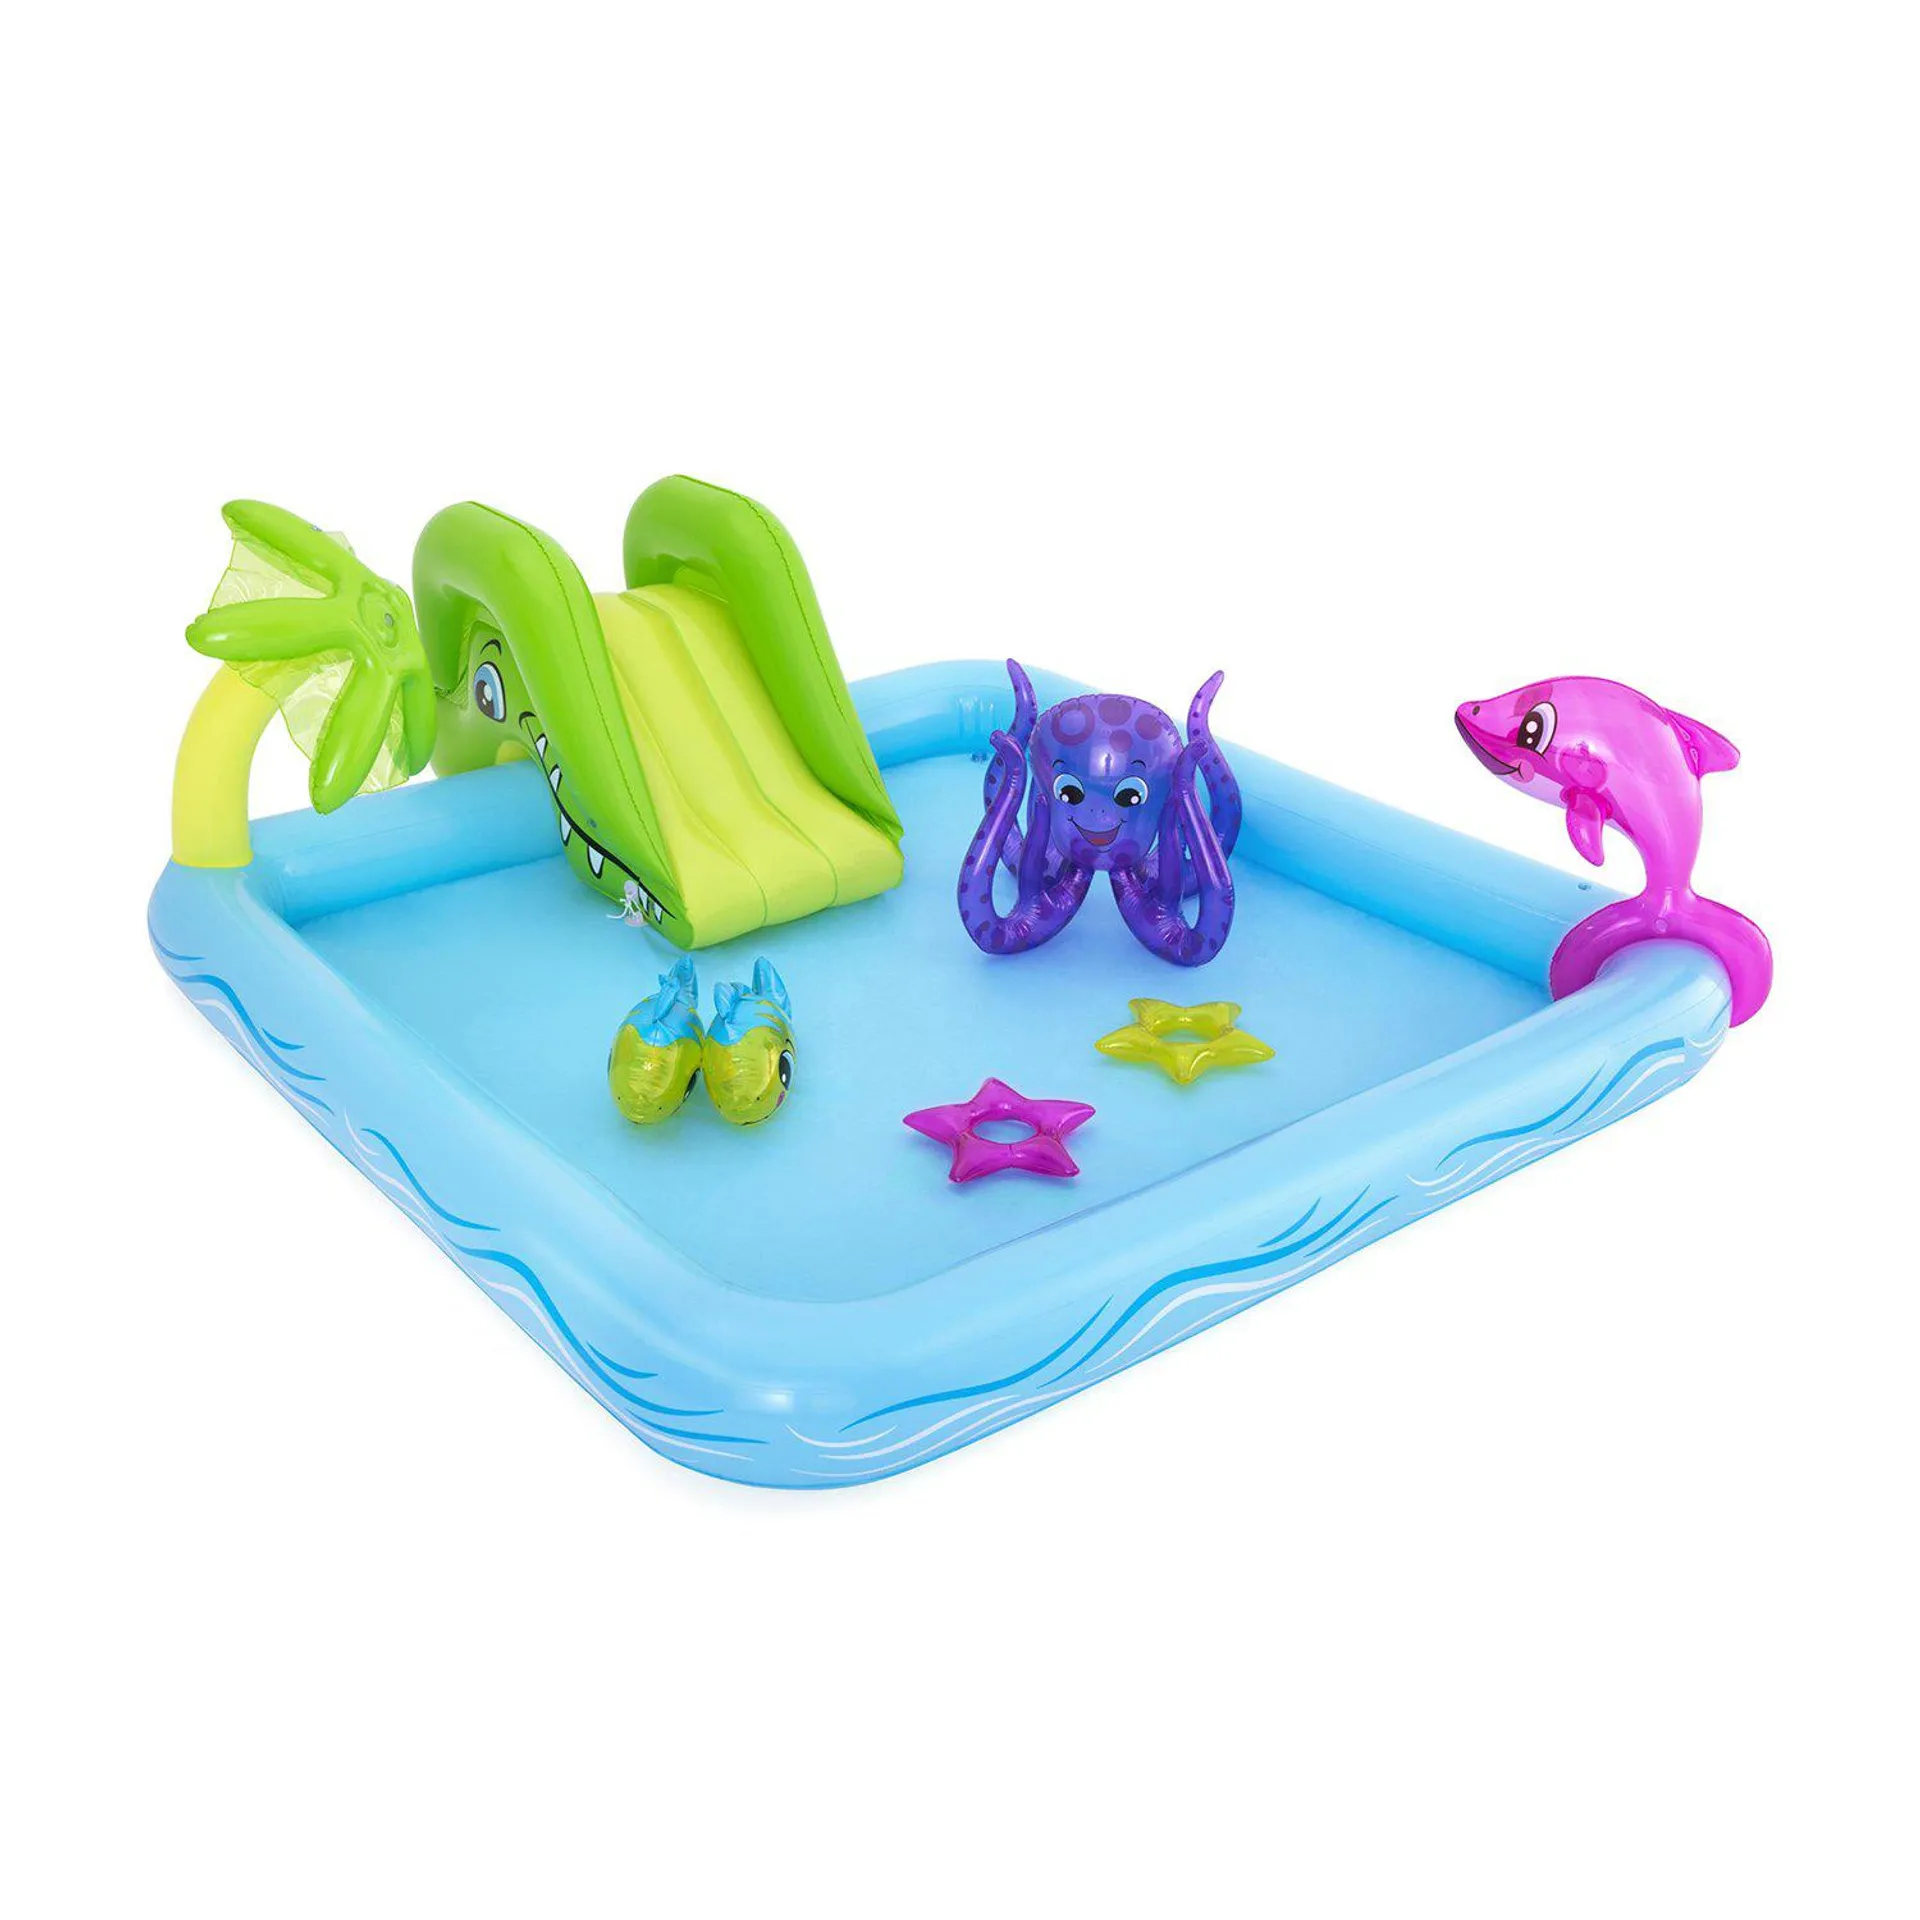 Acuario Inflable 2.39 m x 2.06 m x 86 cm